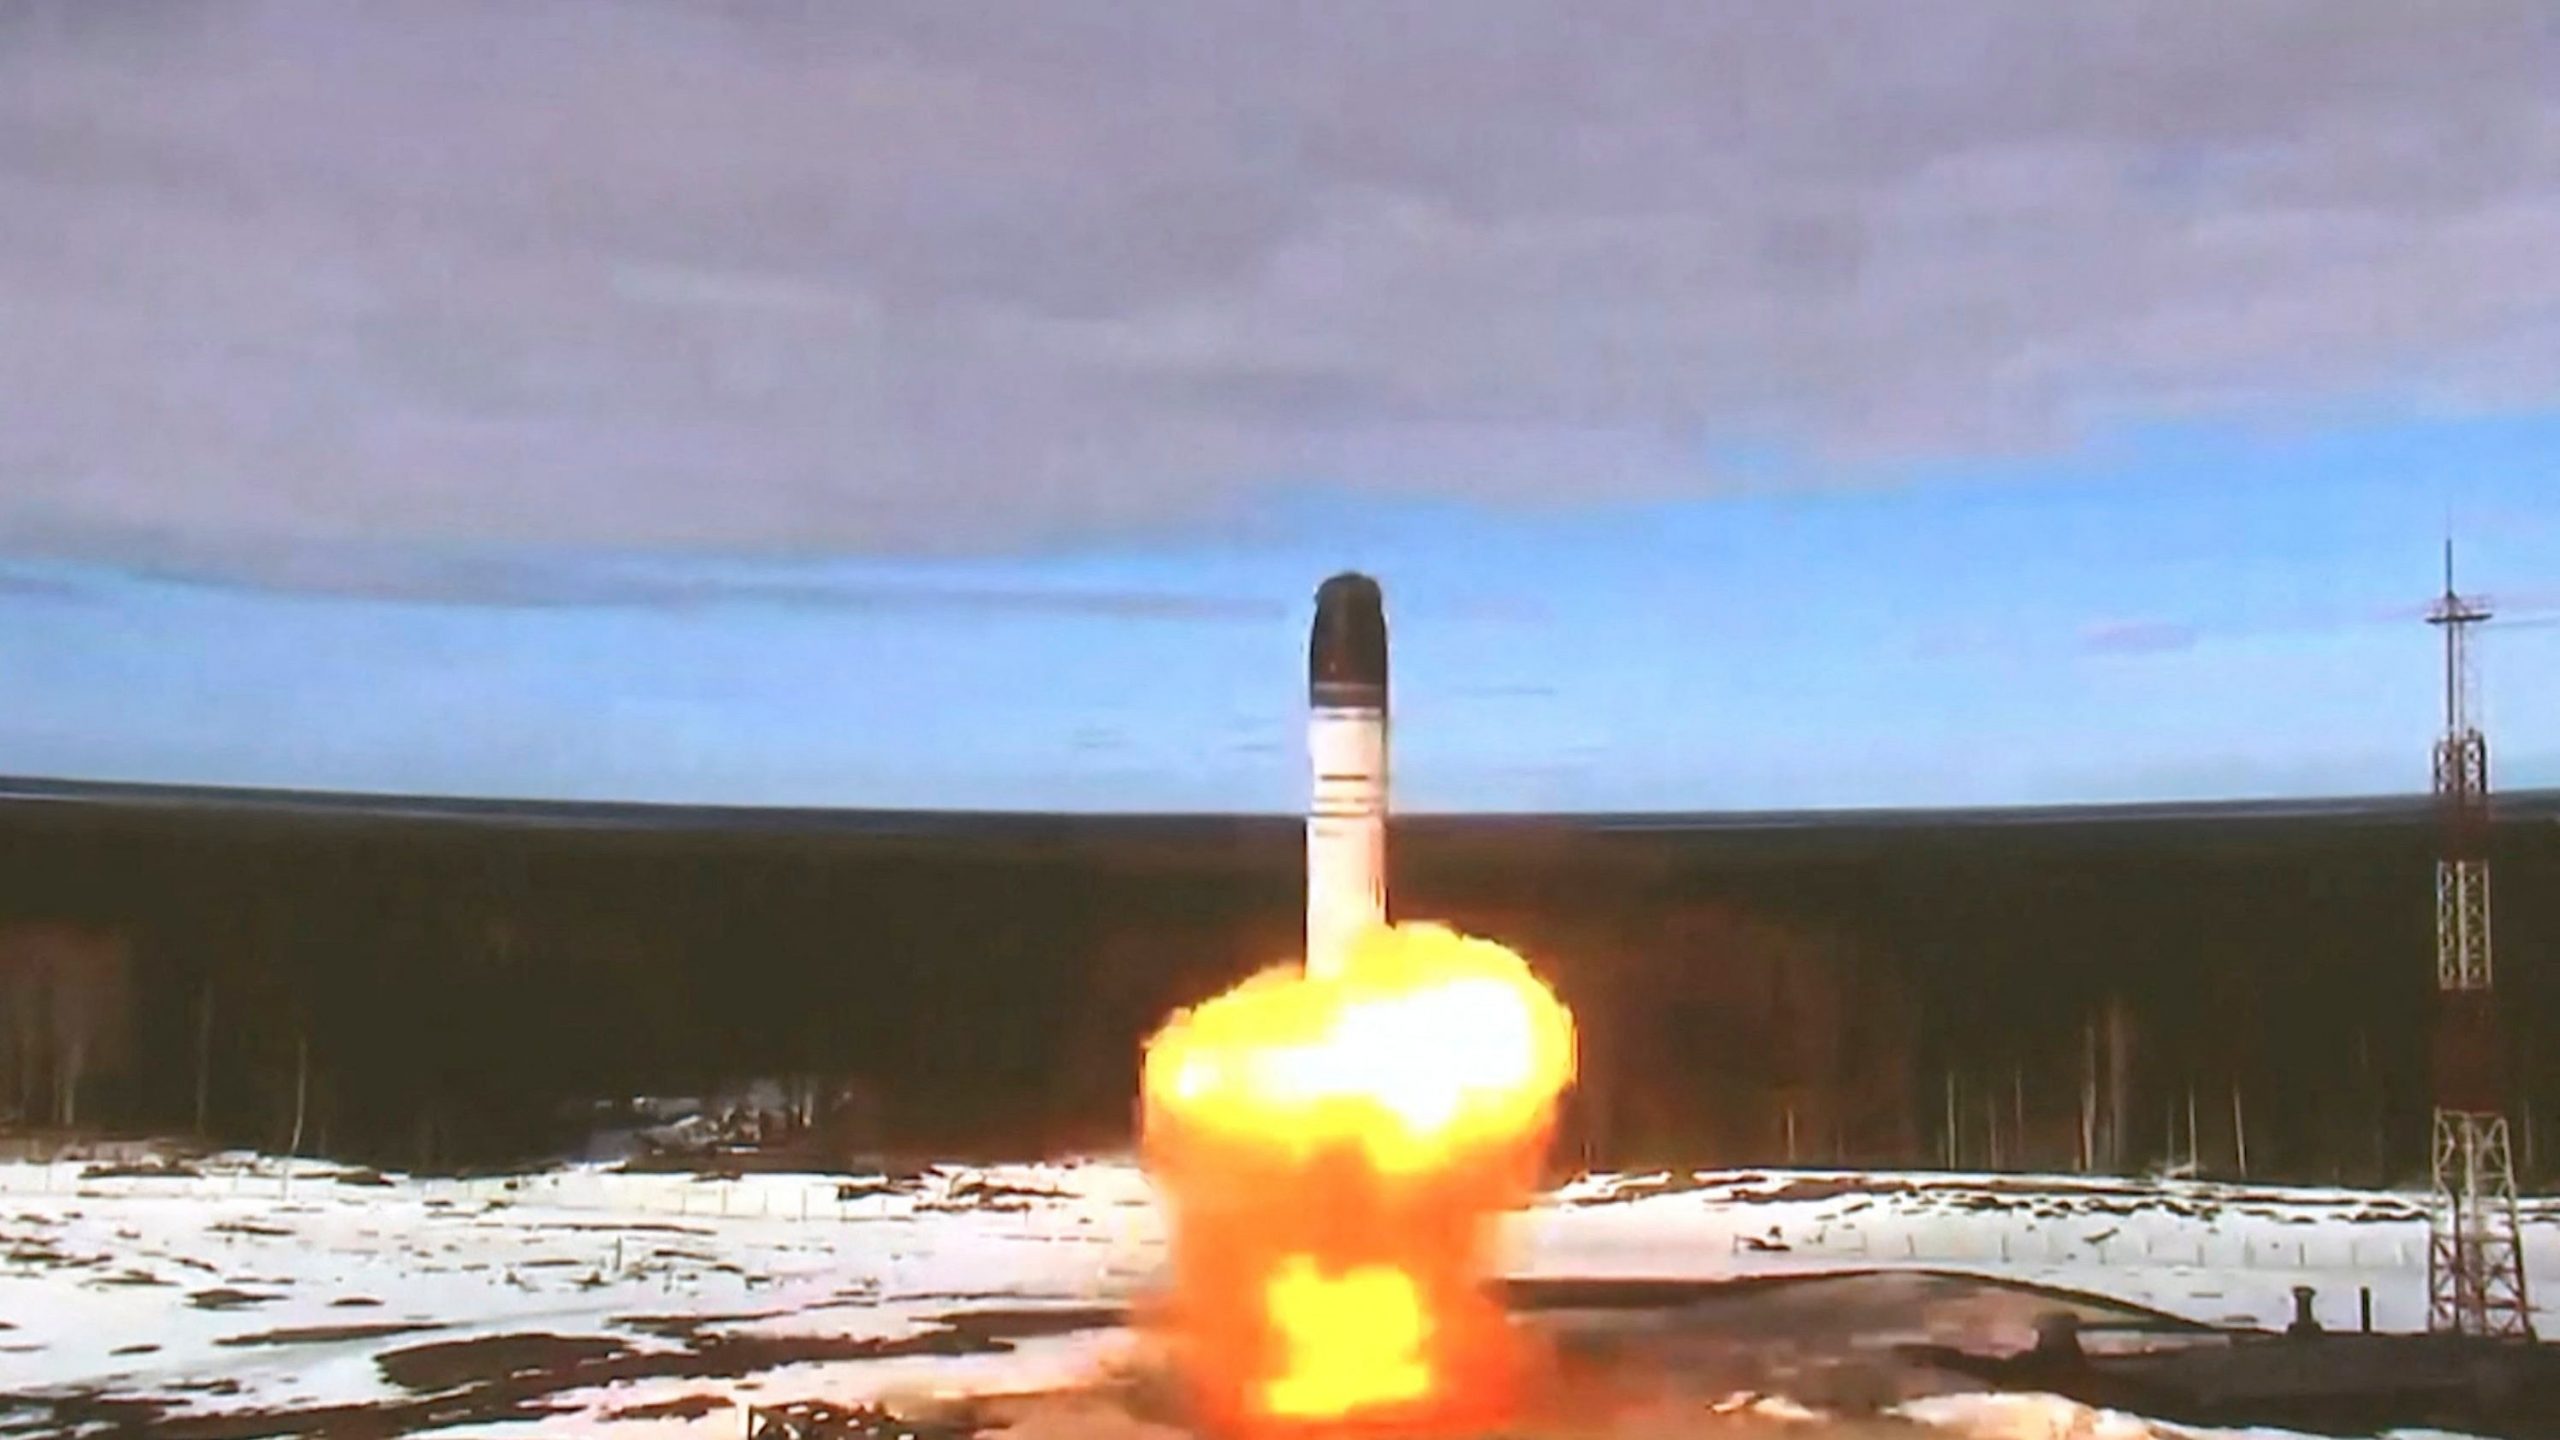 Watch: Russia’s Sarmat ballistic missile tests show strength against West